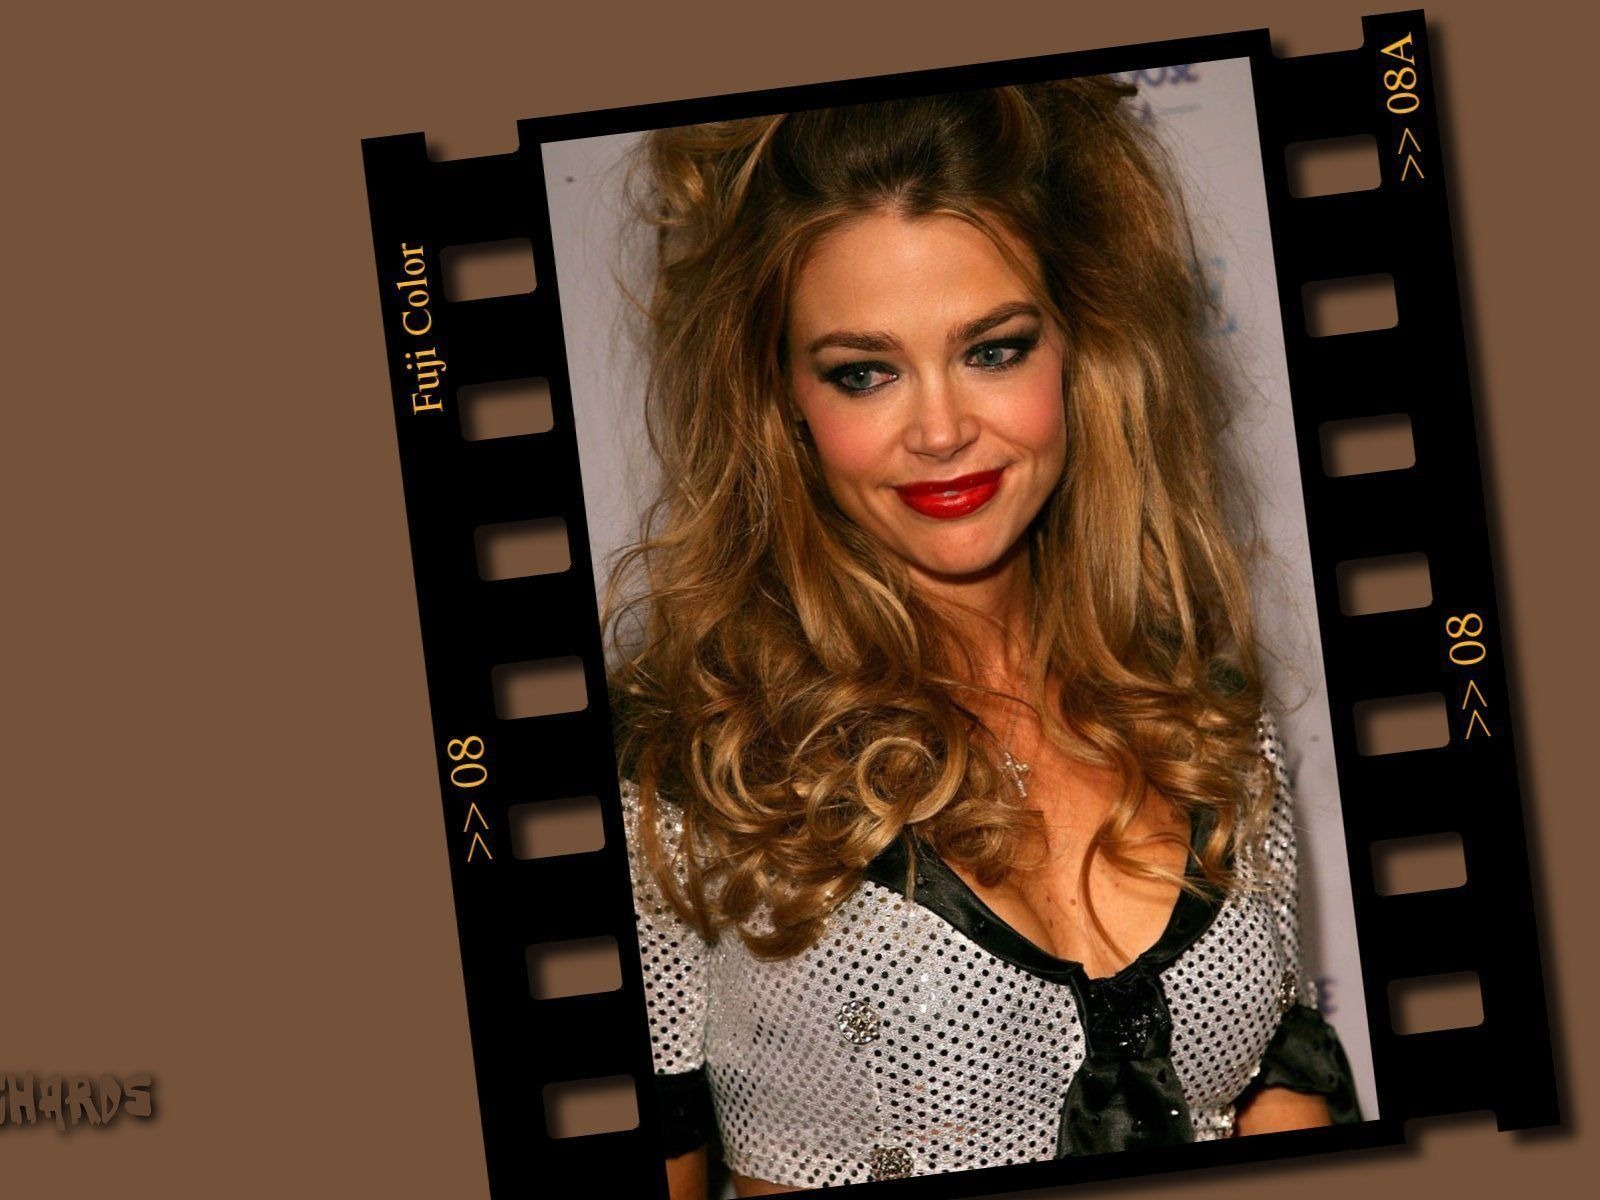 Denise Richards #006 - 1600x1200 Wallpapers Pictures Photos Images